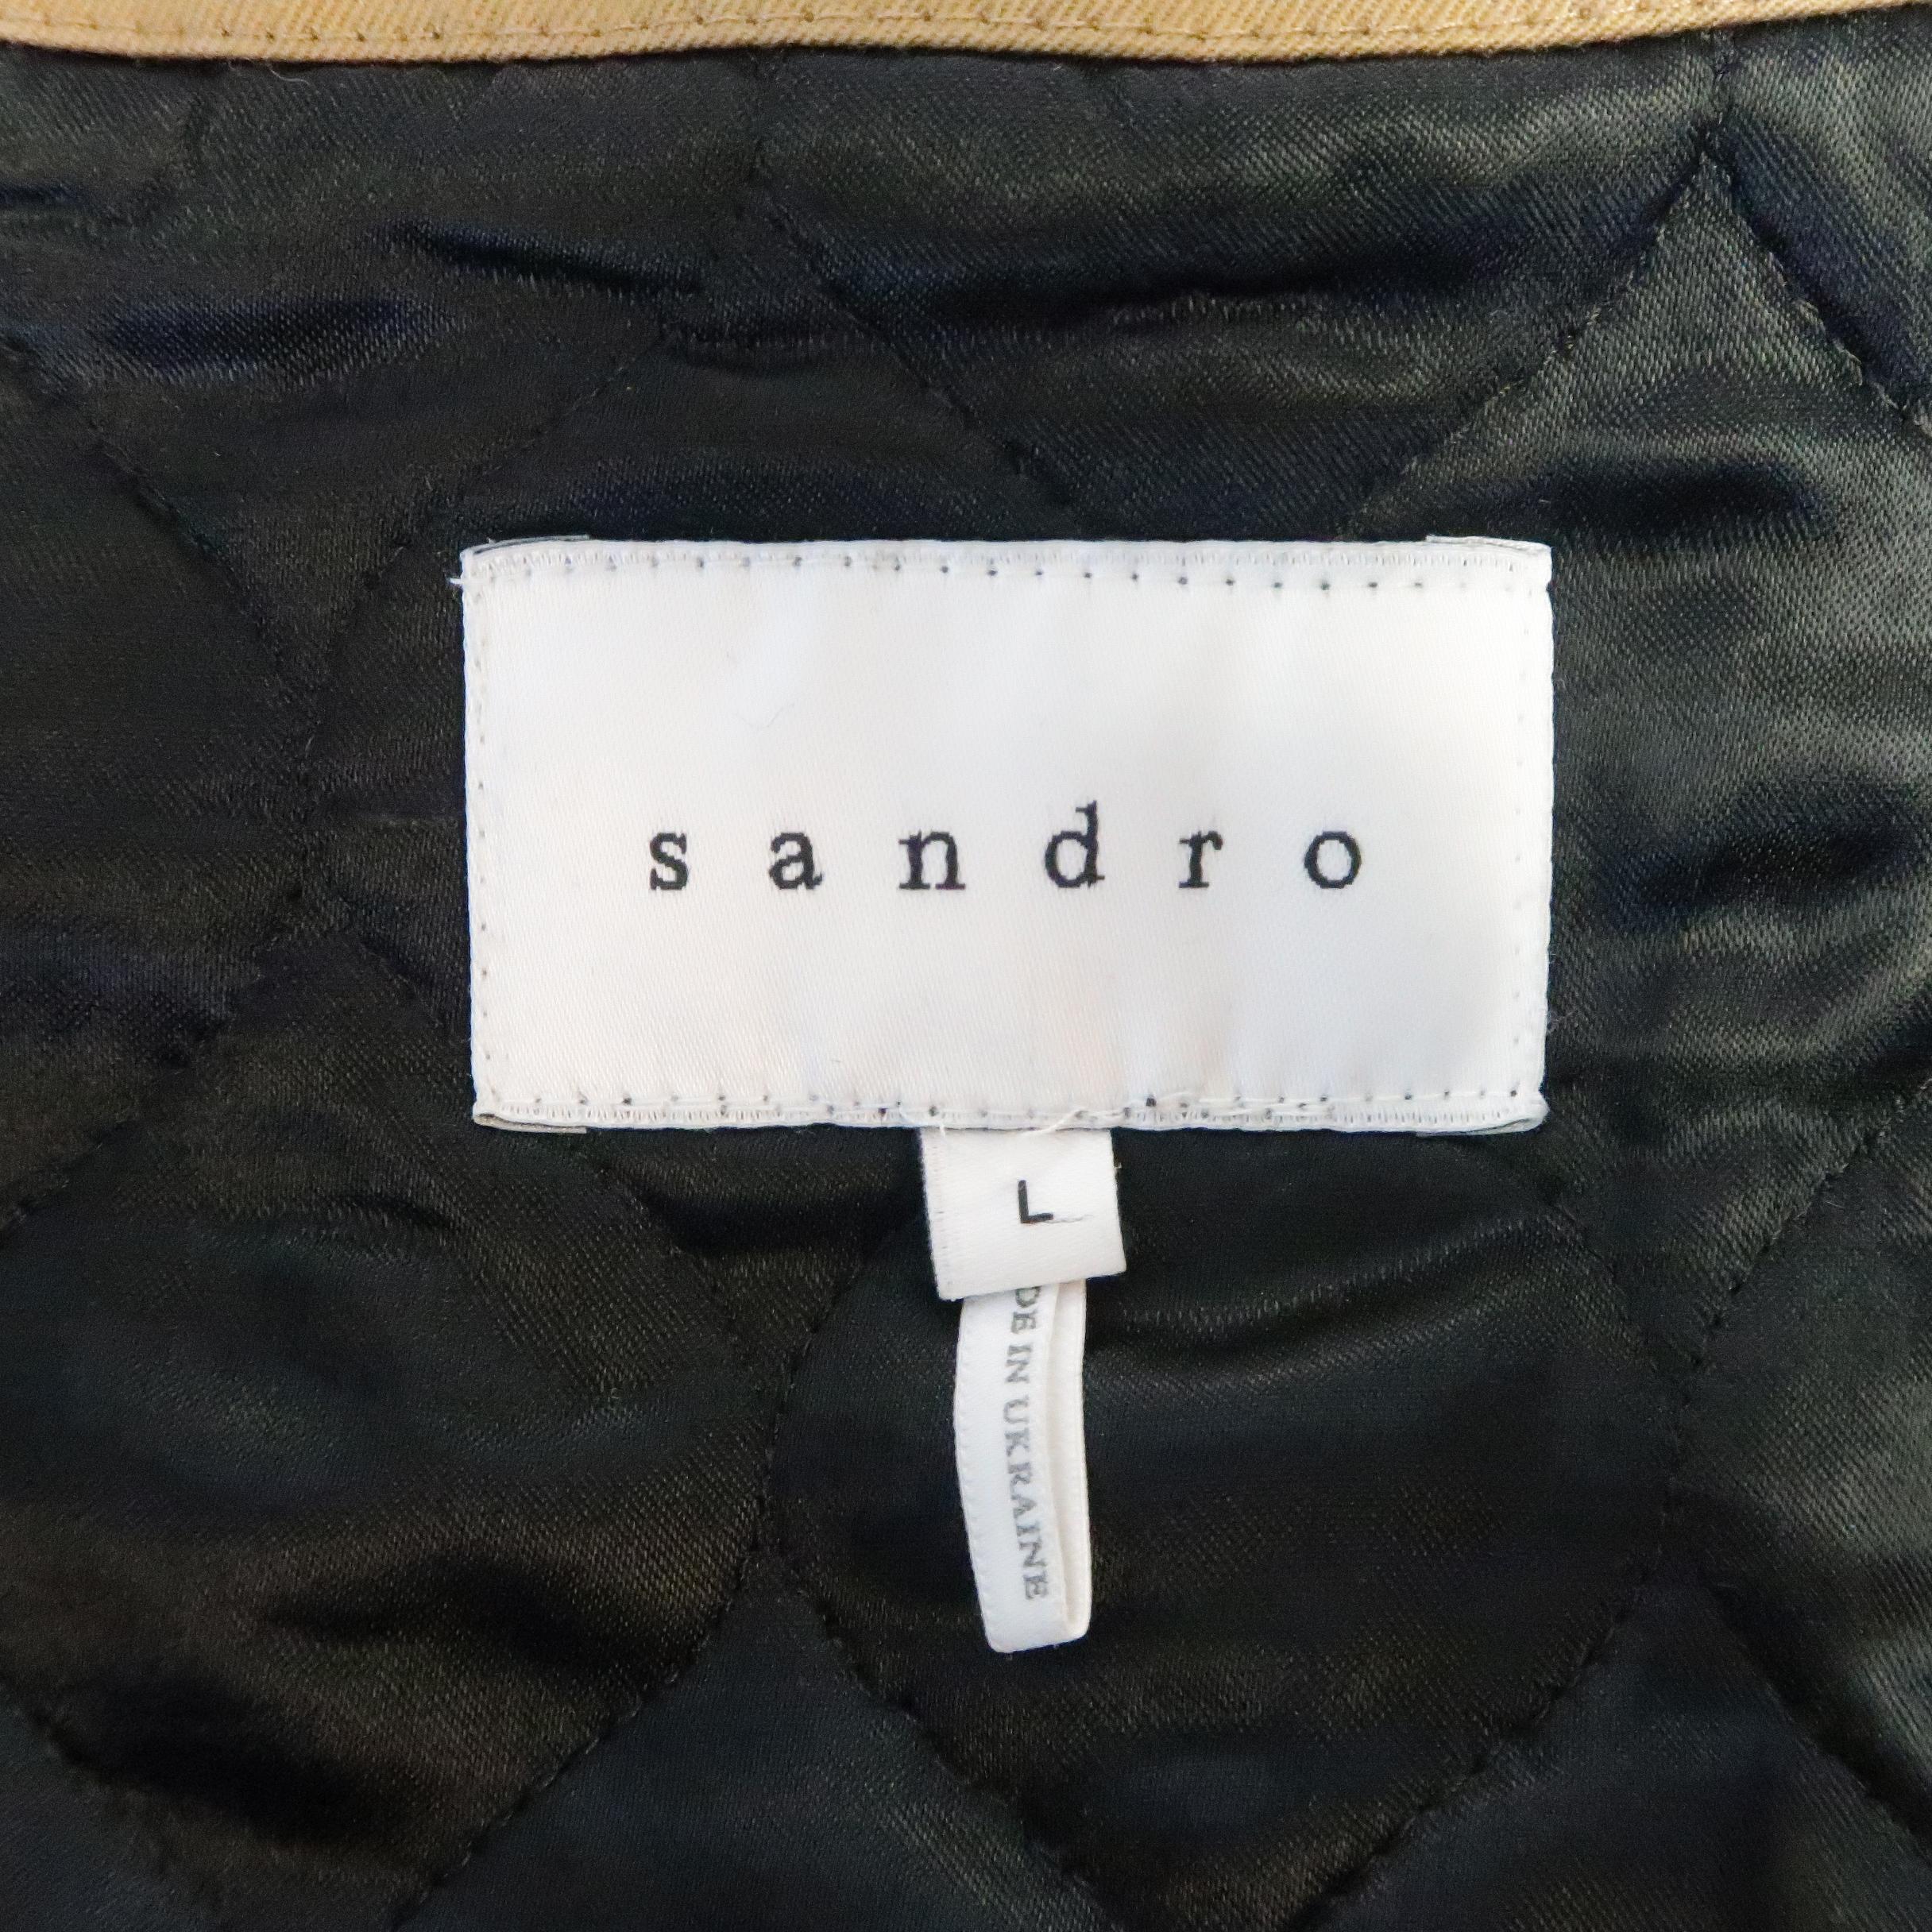 SANDRO L Tan Solid Cotton Hooded Jacket 8